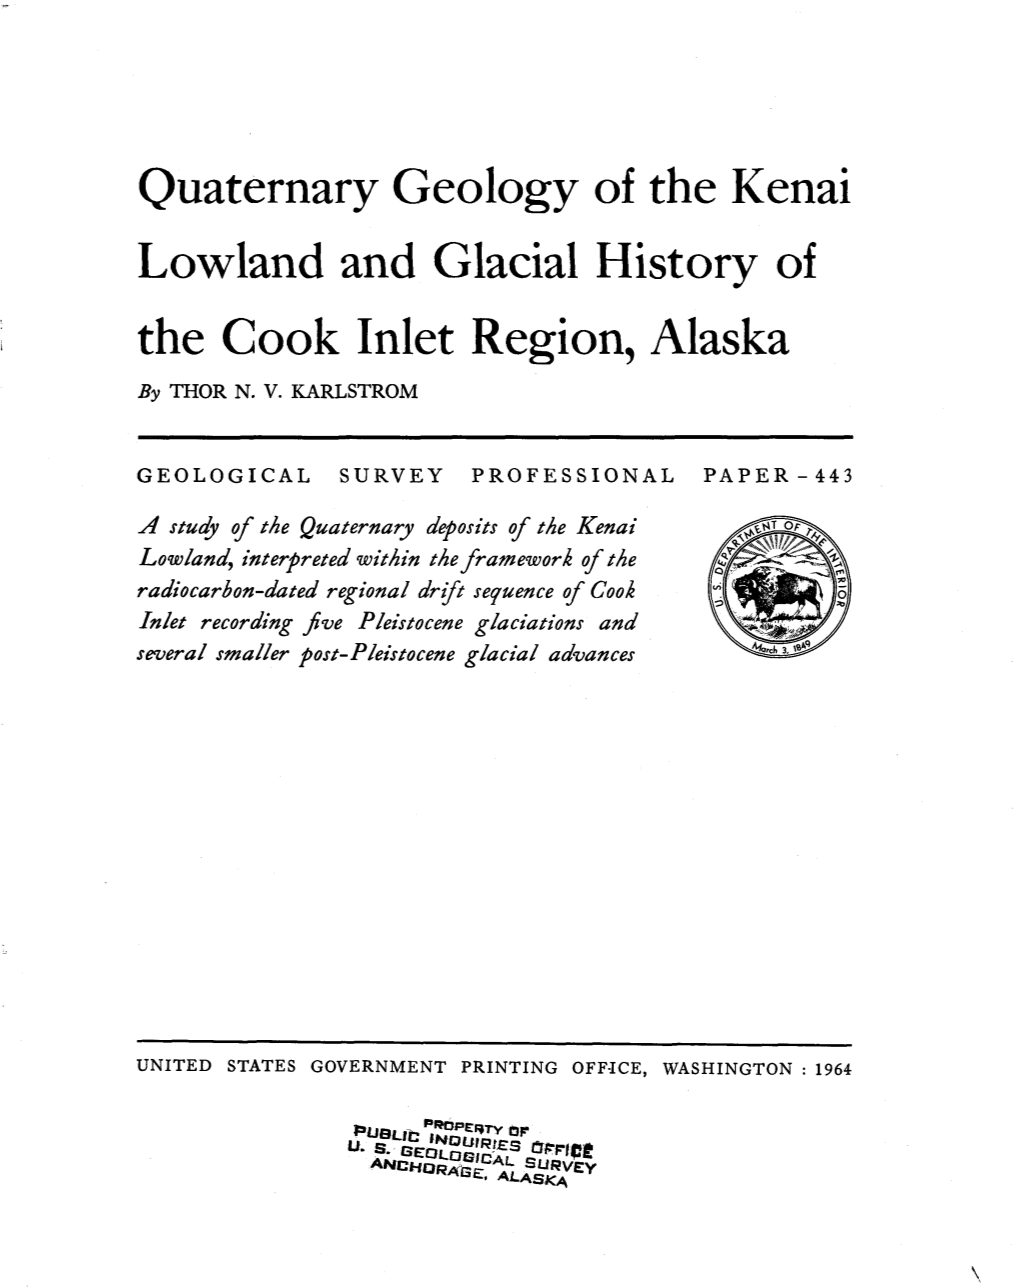 Quaternary Geology of the Kenai Lowland and Glacial History of the Cook Inlet Region, Alaska by THOR N